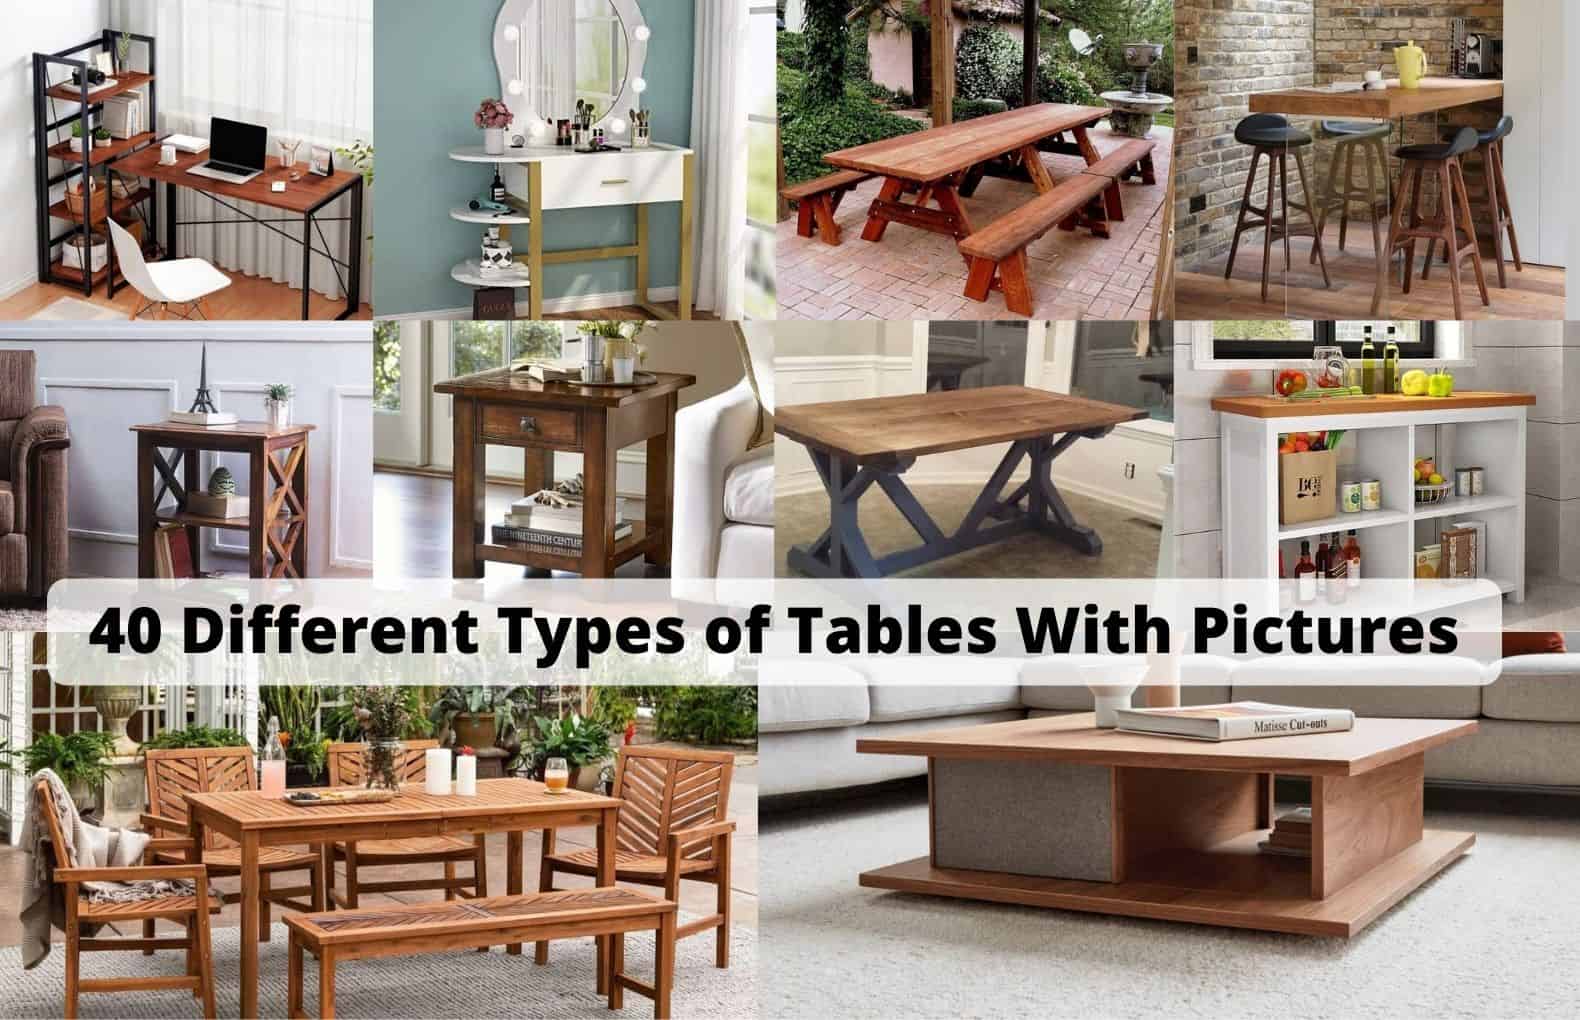 20 Types Of Tables   Different Types Of Tables   Best Types Of ...